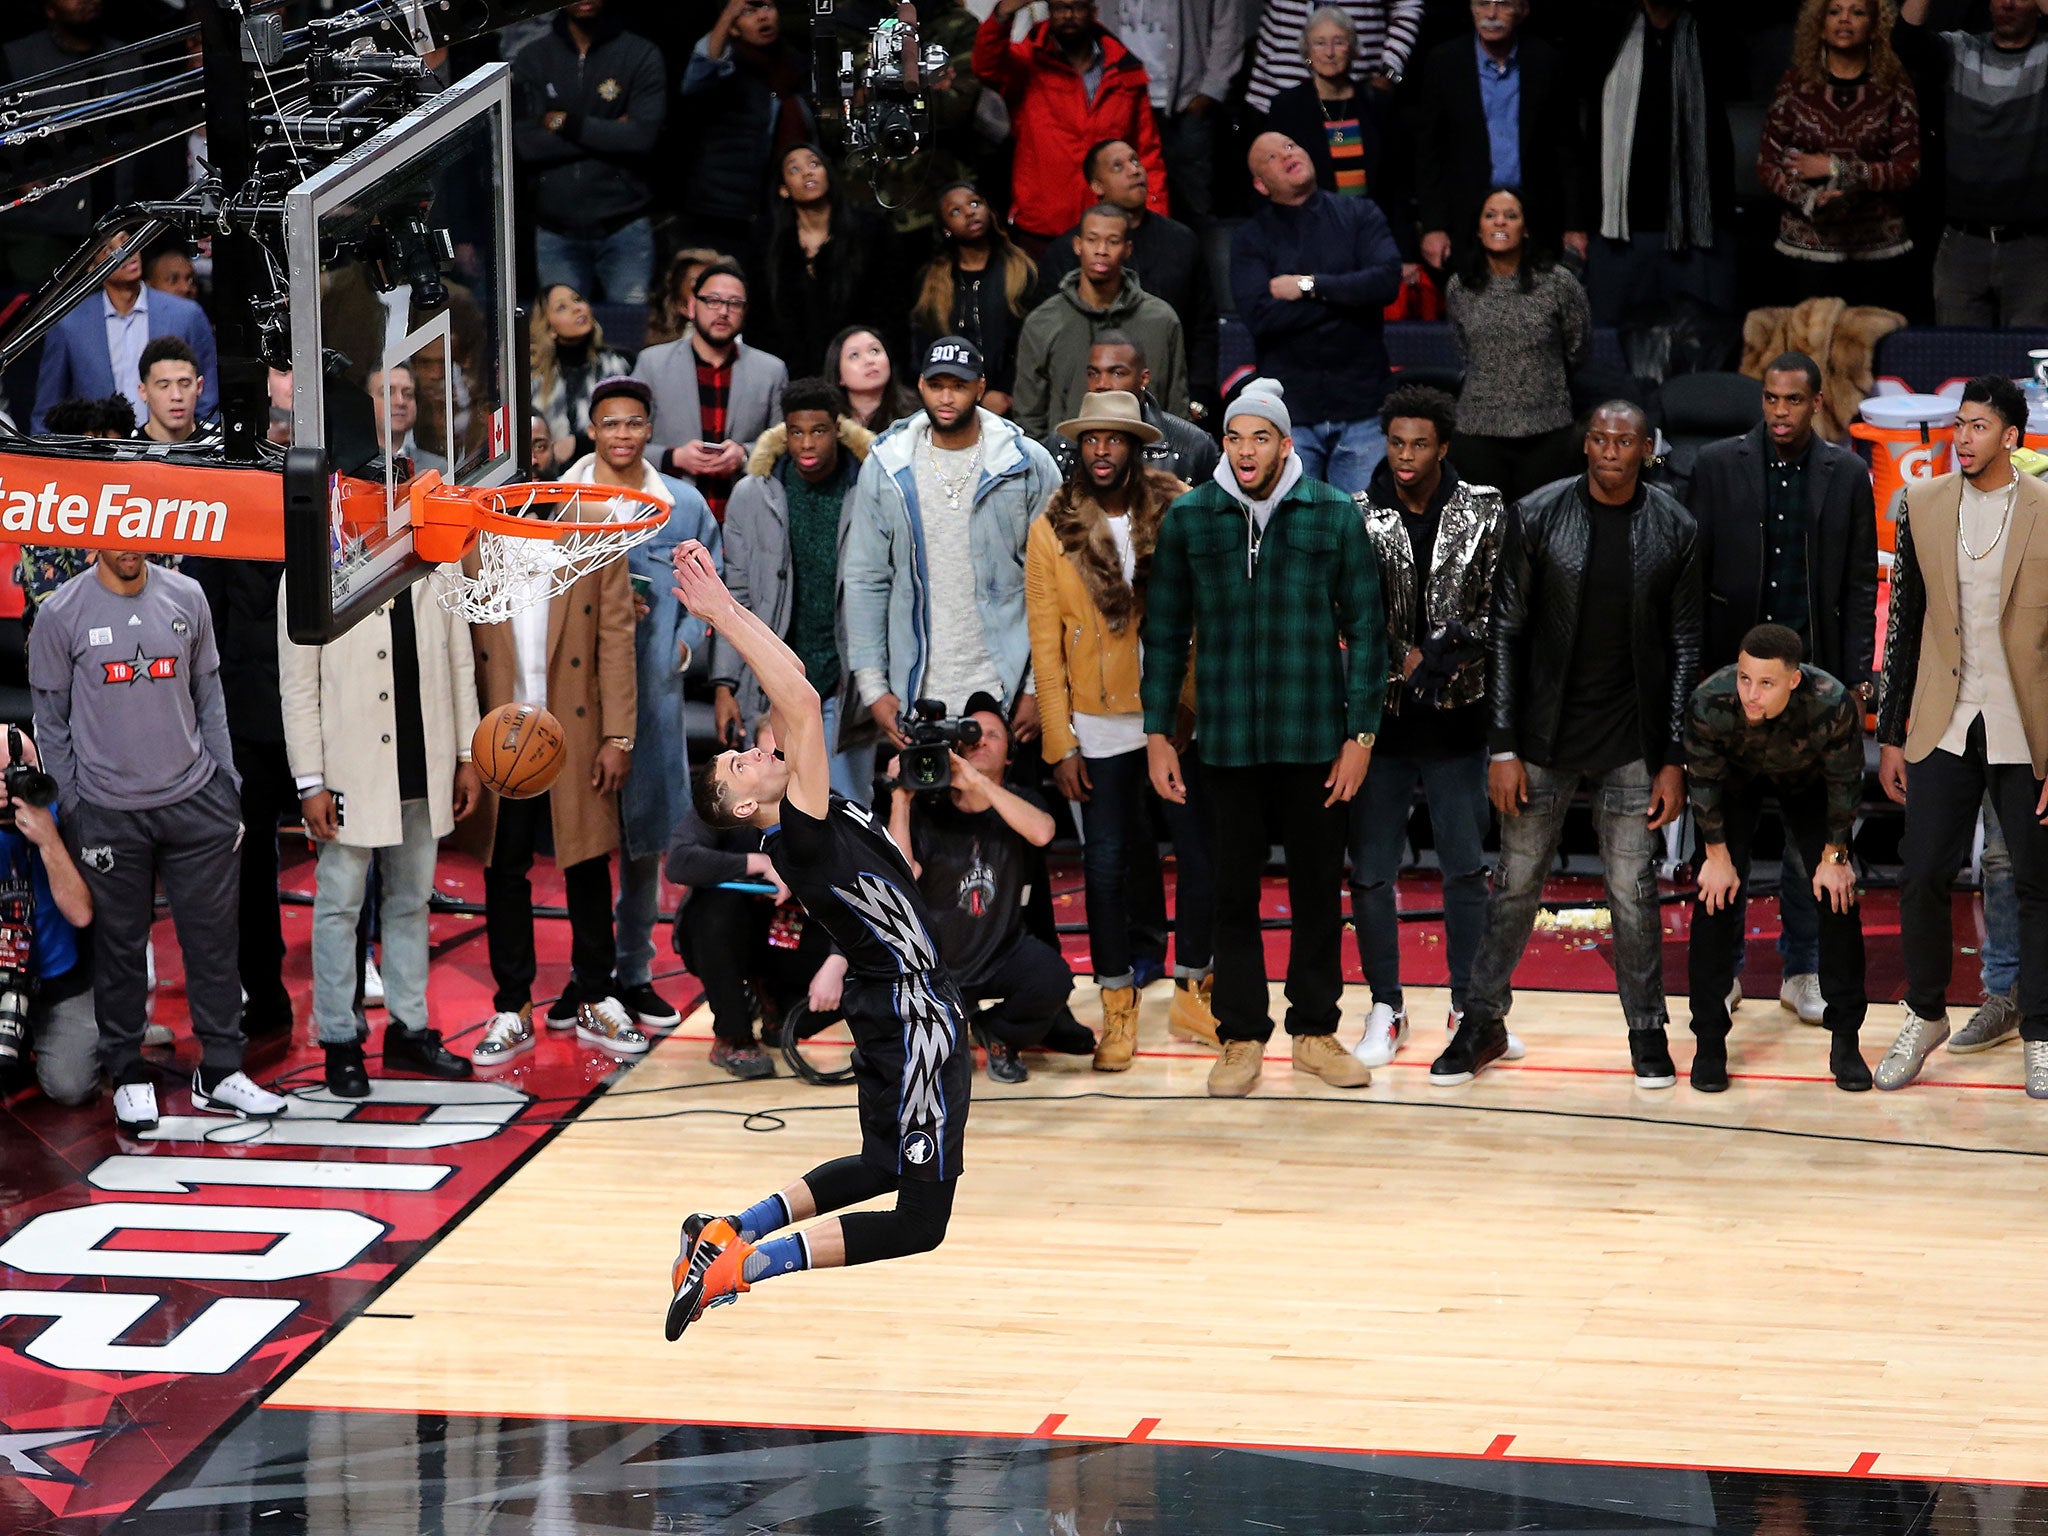 Zach LaVine of the Minnesota Timberwolves dunks as NBA players look on in the Verizon Slam Dunk Contest during NBA All-Star Weekend